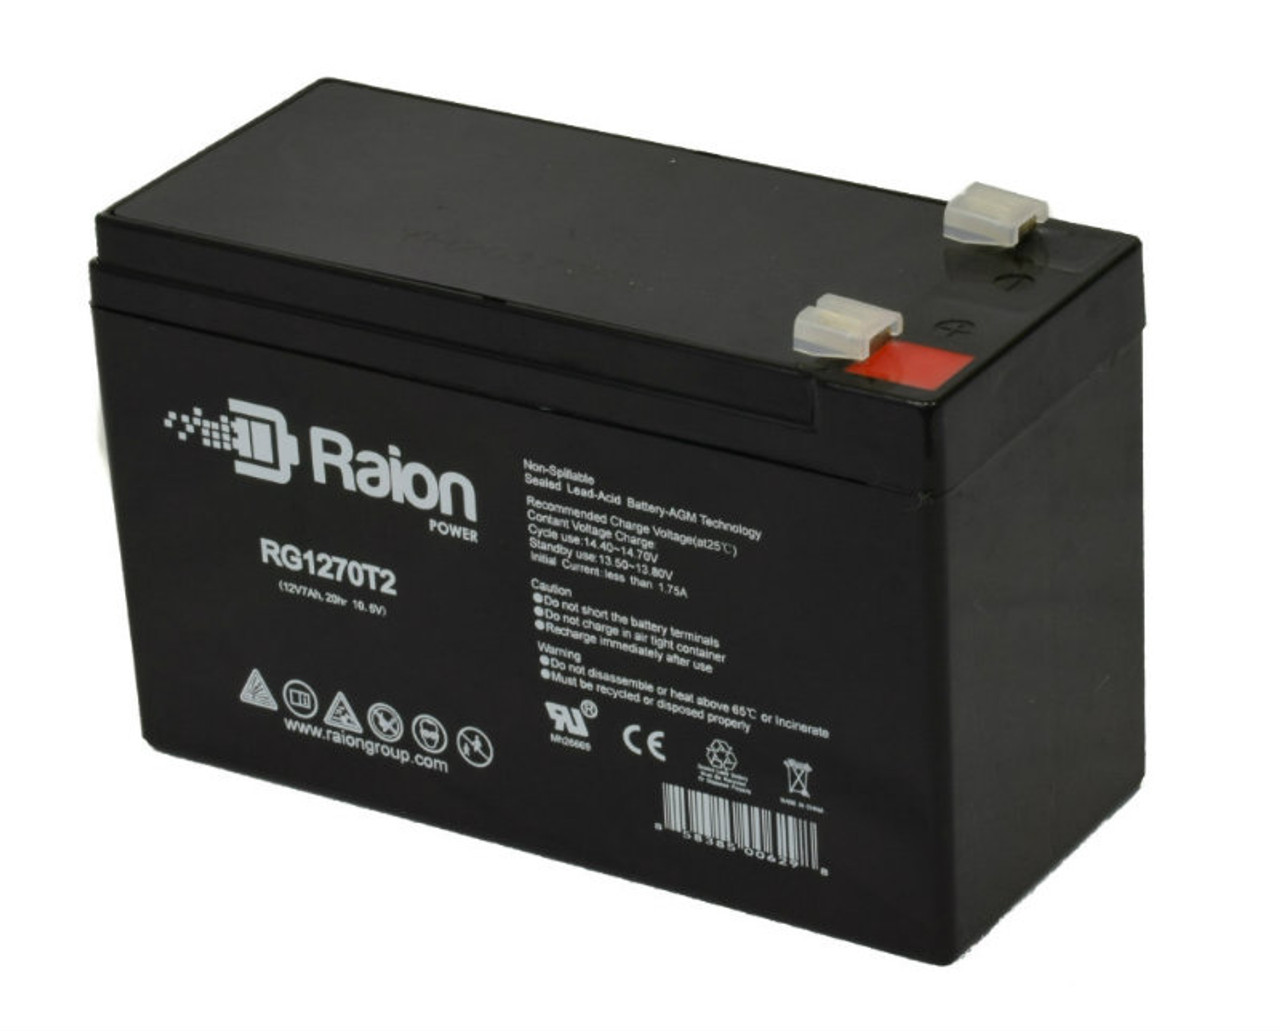 Raion Power Replacement 12V 7Ah Battery for Alexander PS1270 - 1 Pack